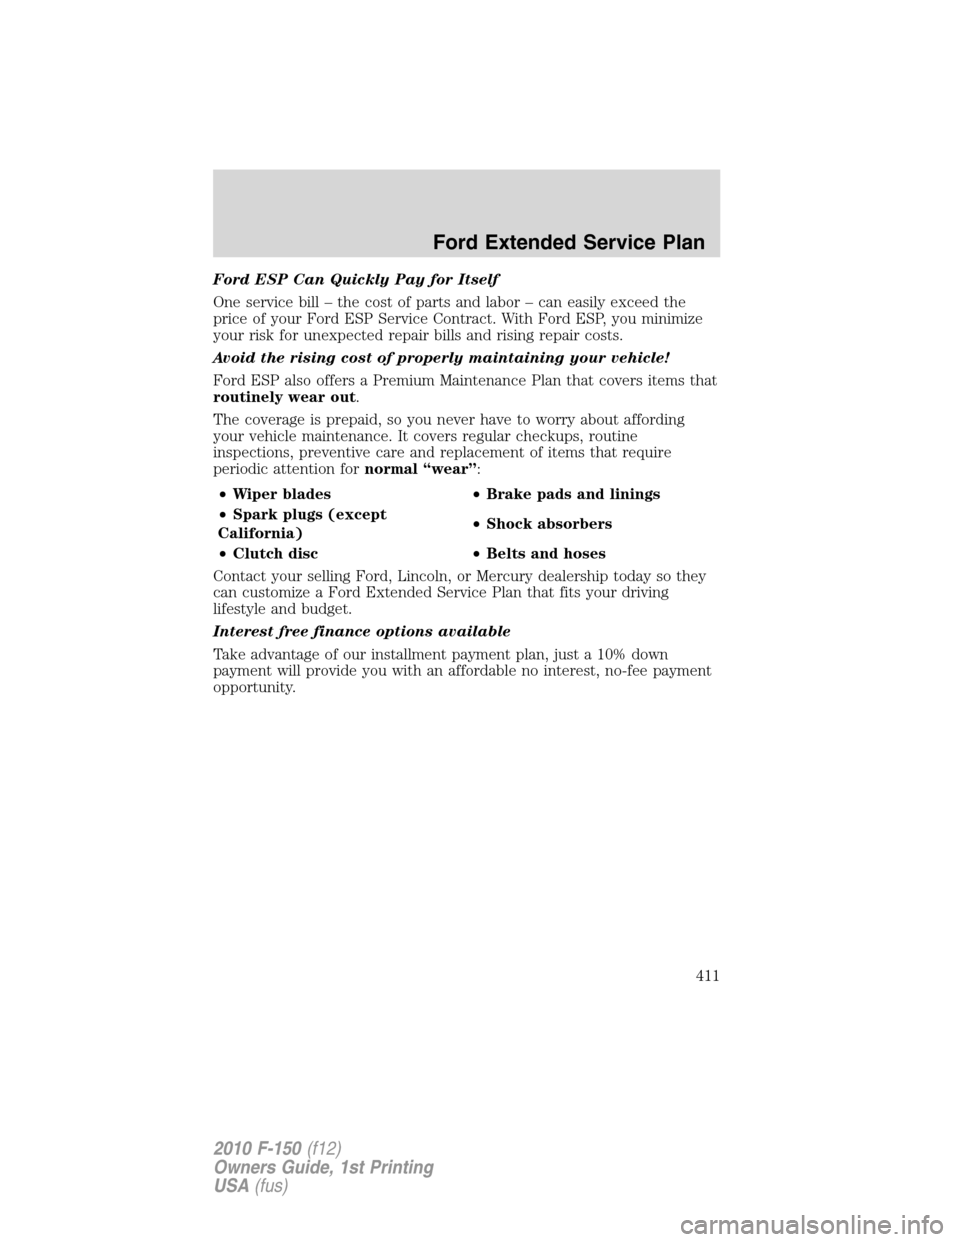 FORD F150 2010 12.G Owners Manual Ford ESP Can Quickly Pay for Itself
One service bill – the cost of parts and labor – can easily exceed the
price of your Ford ESP Service Contract. With Ford ESP, you minimize
your risk for unexpe